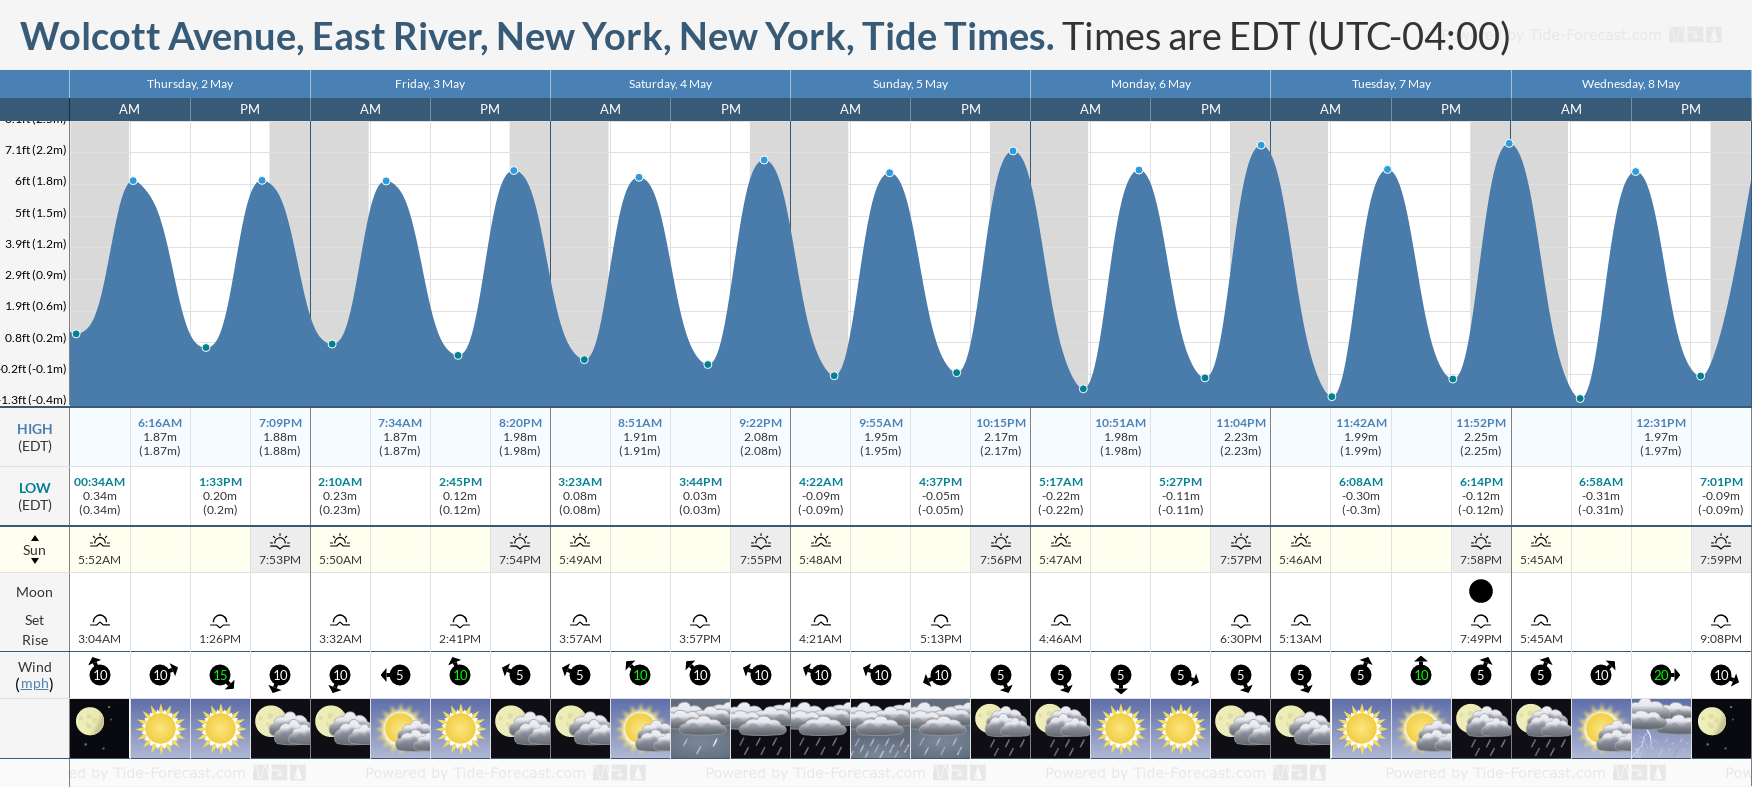 Wolcott Avenue, East River, New York, New York Tide Chart including high and low tide tide times for the next 7 days